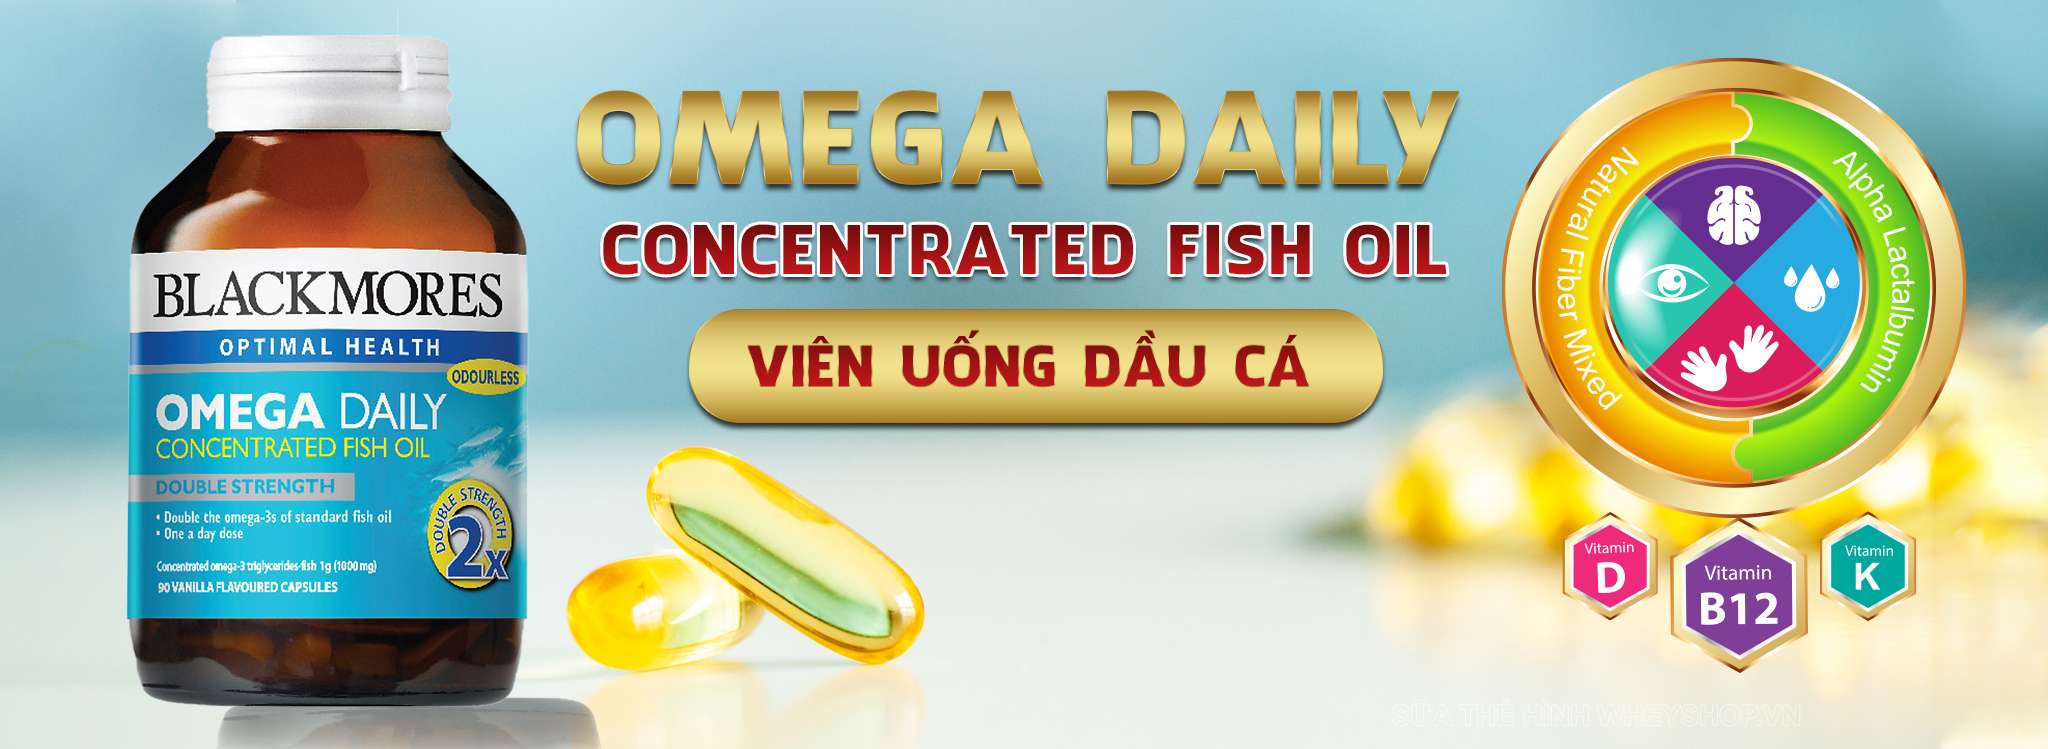 Blackmores Omega-3 Daily Concentrated Fish Oil gai re ha noi tphcm